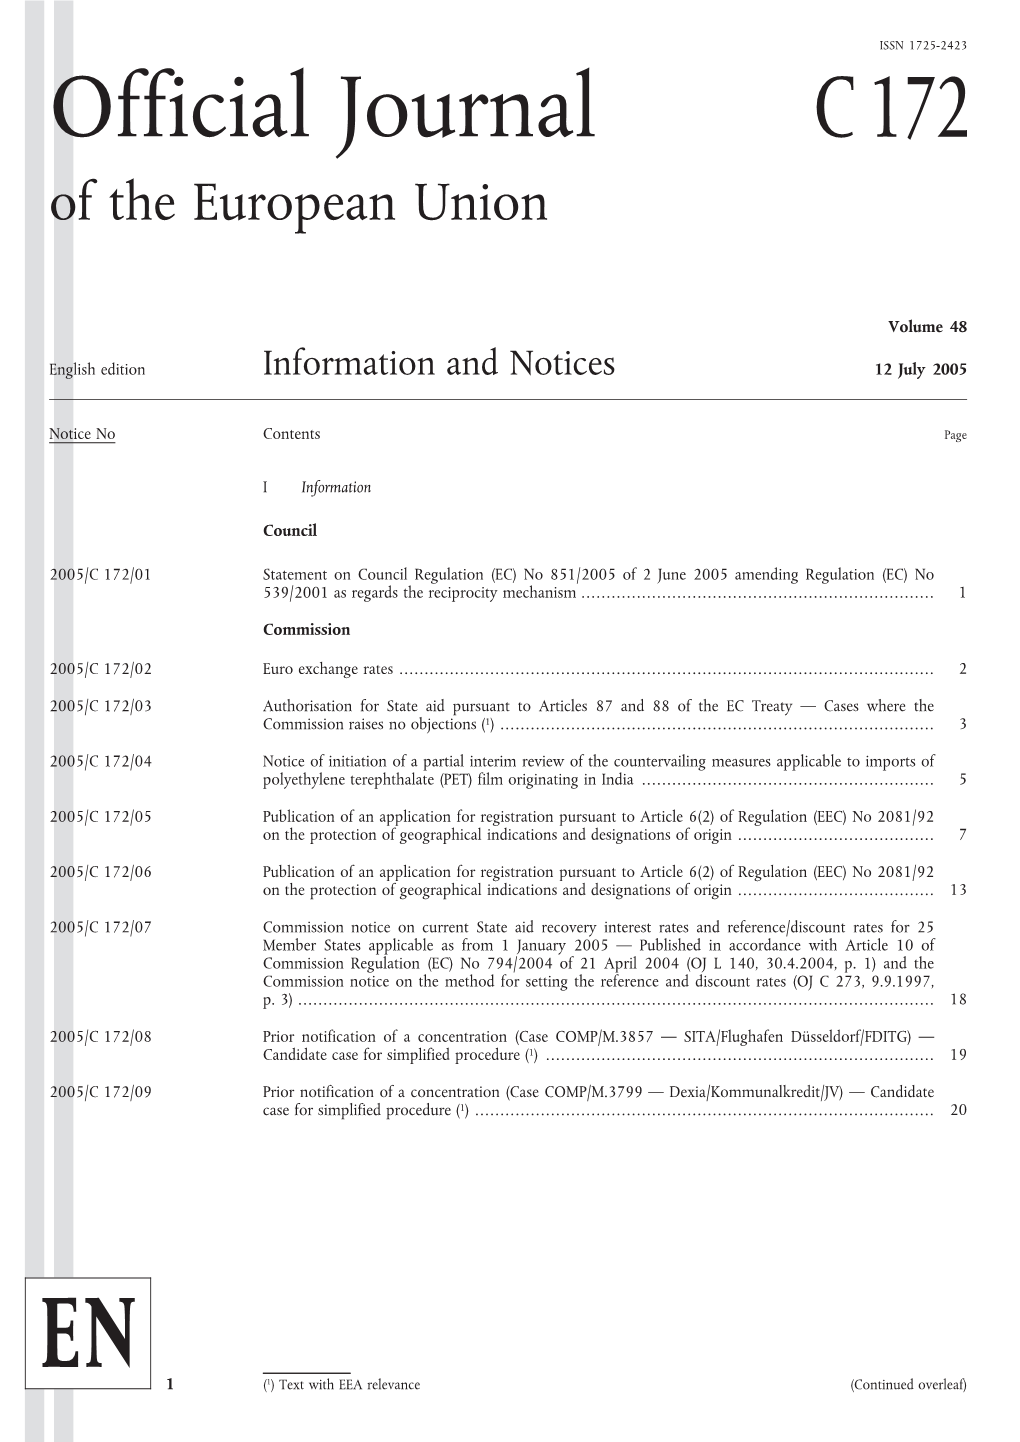 Official Journal C172 of the European Union